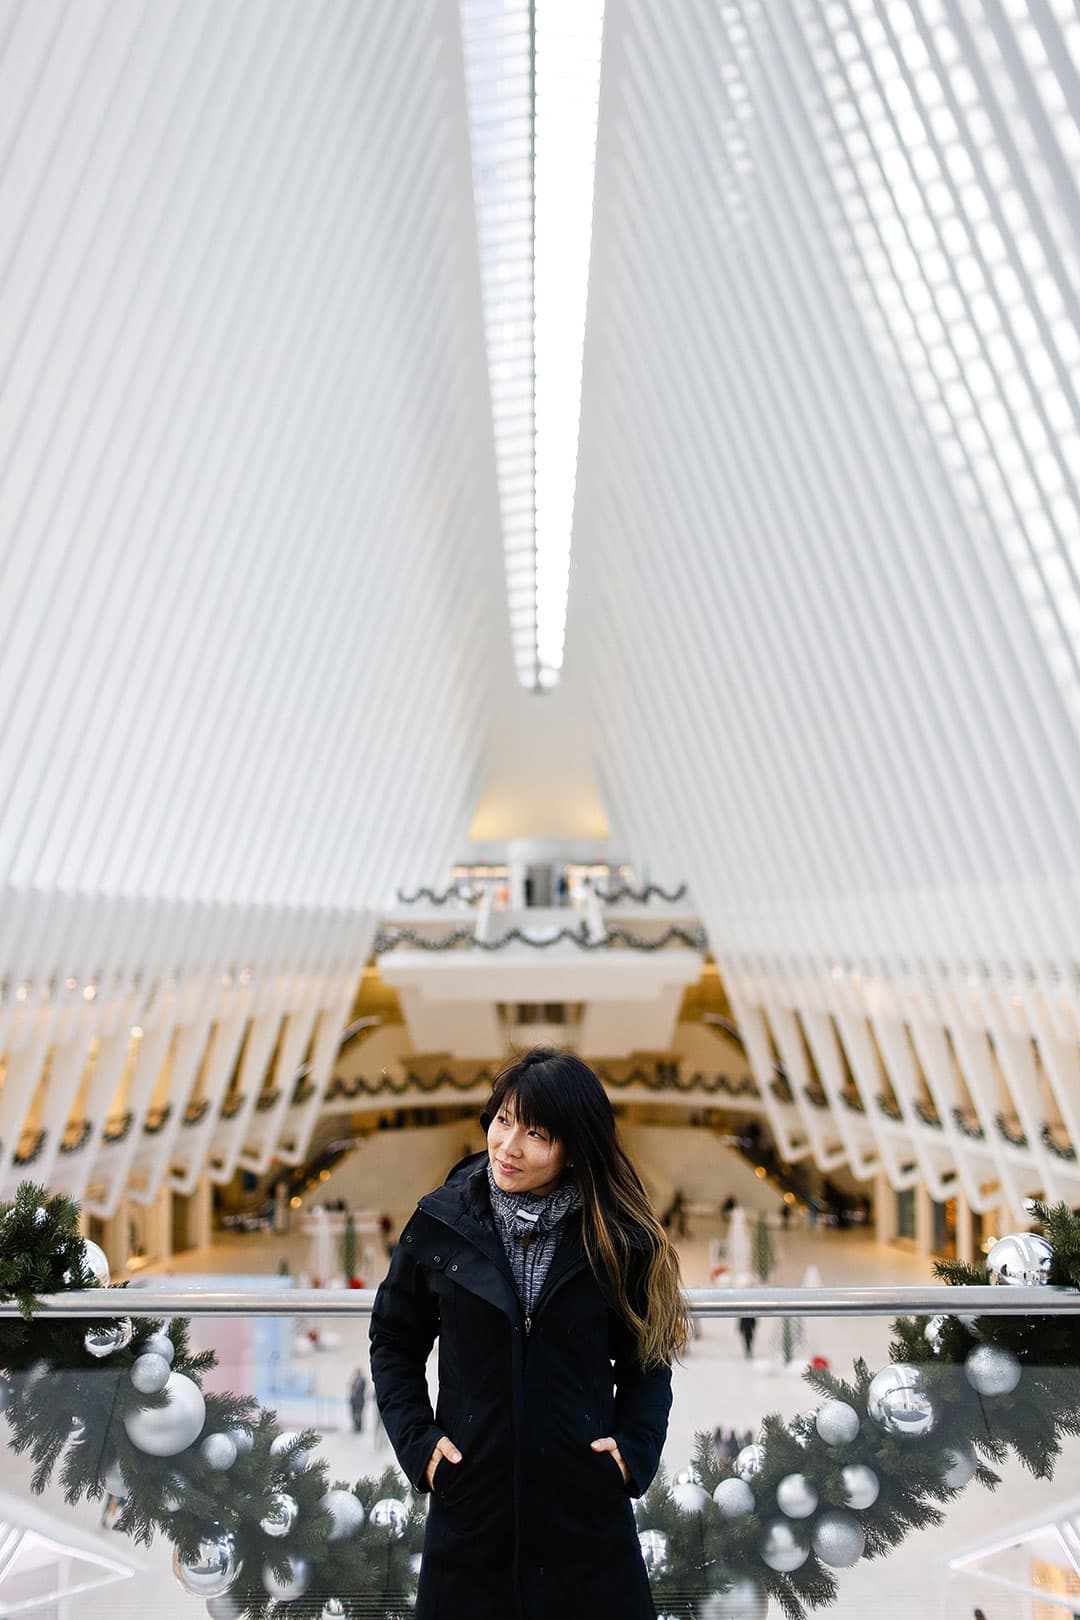 The Oculus New York, World Trade Center's Transportation Hub, New York City + 25 Most Instagrammable Spots in NYC